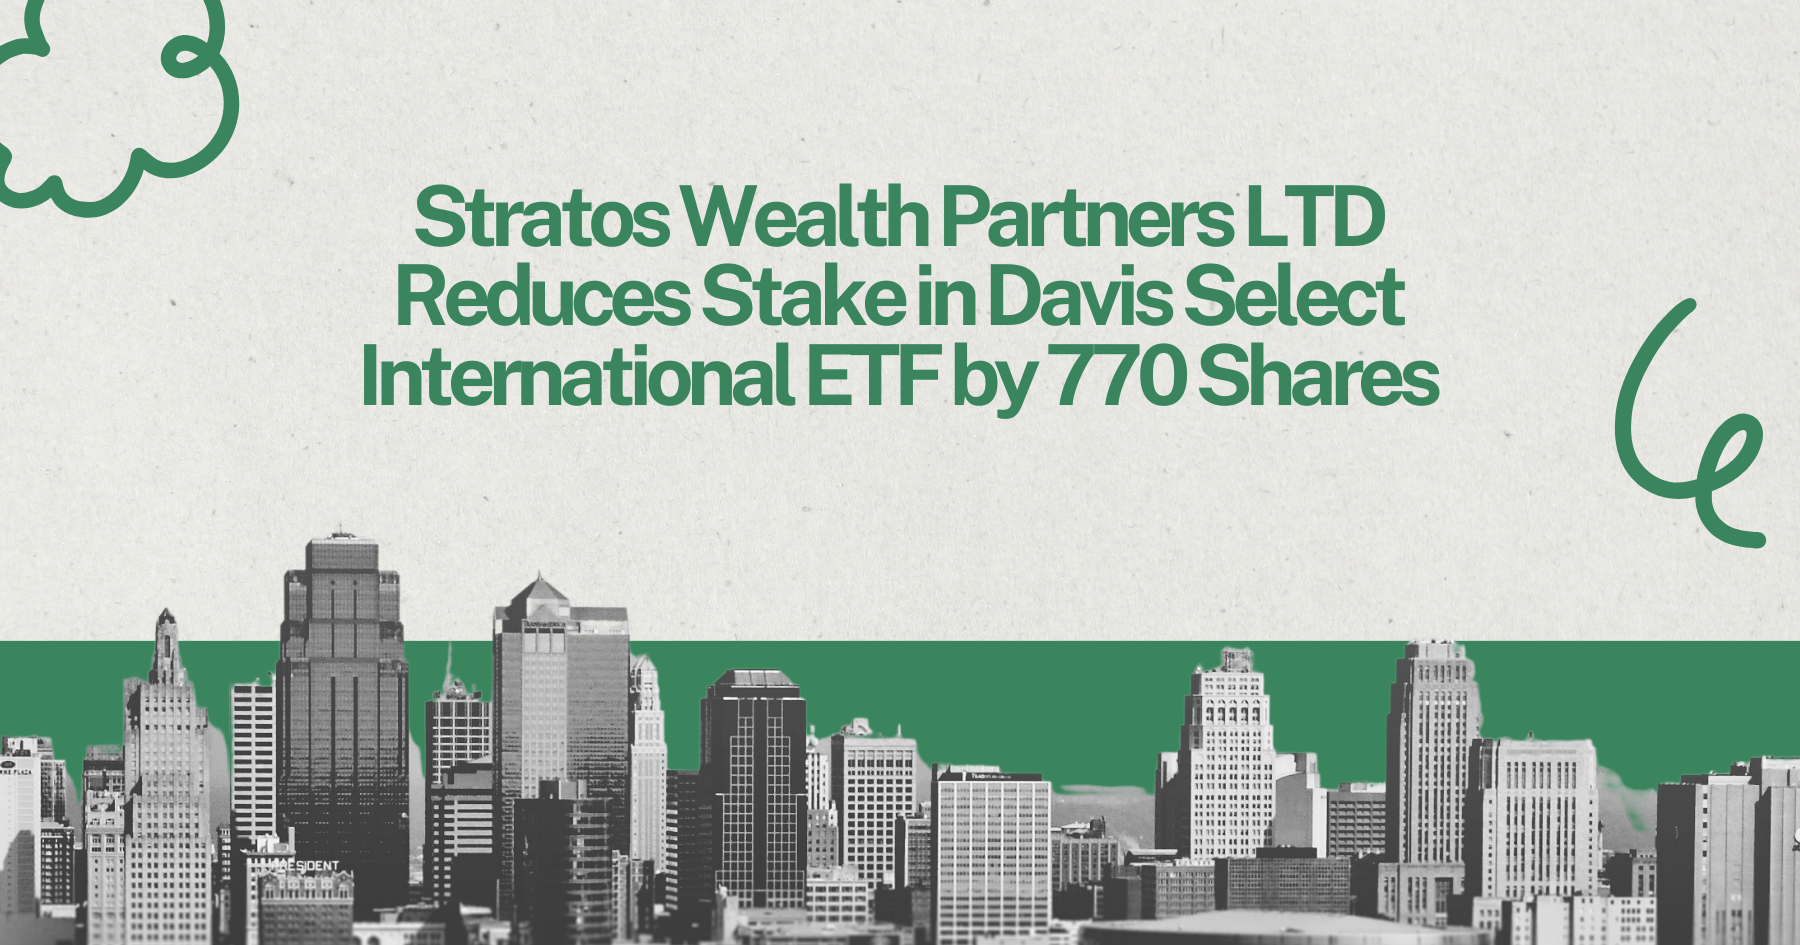 Stratos Wealth Partners LTD Reduces Stake in Davis Select International ETF by 770 Shares